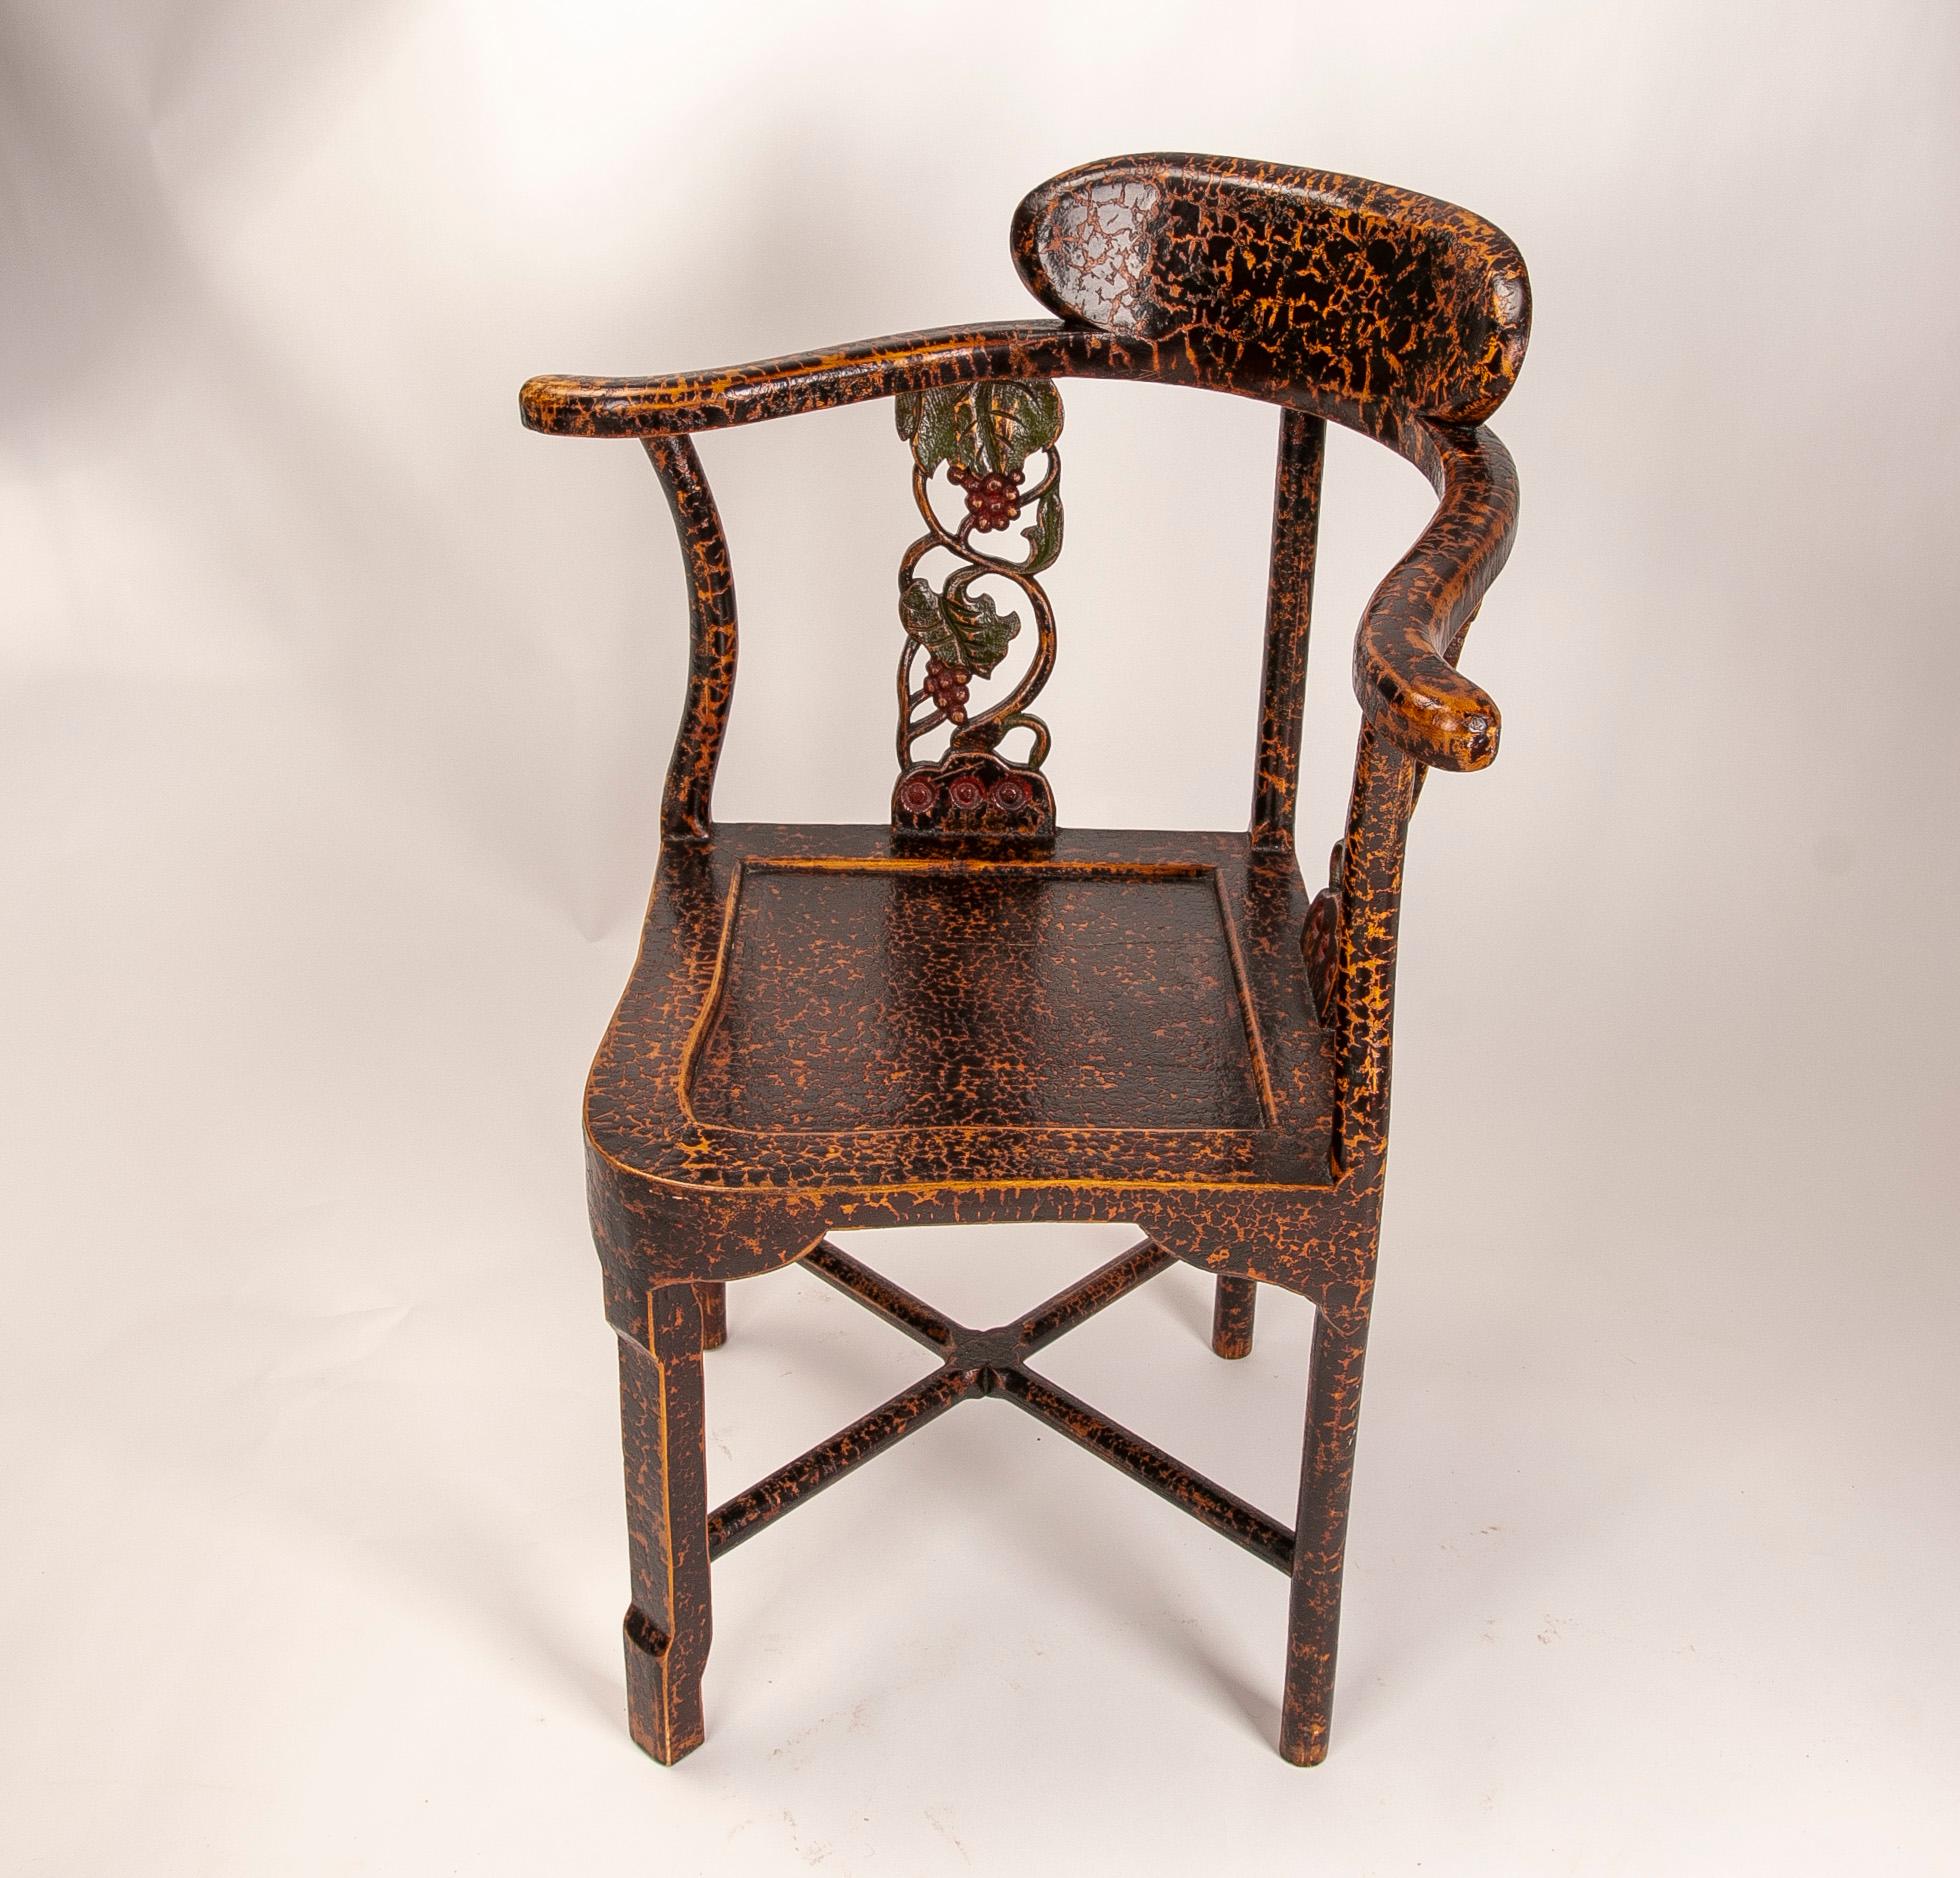 Contemporary Corner Chair with Lacquered Wooden Arms and Carved Flowers on the Backrest For Sale